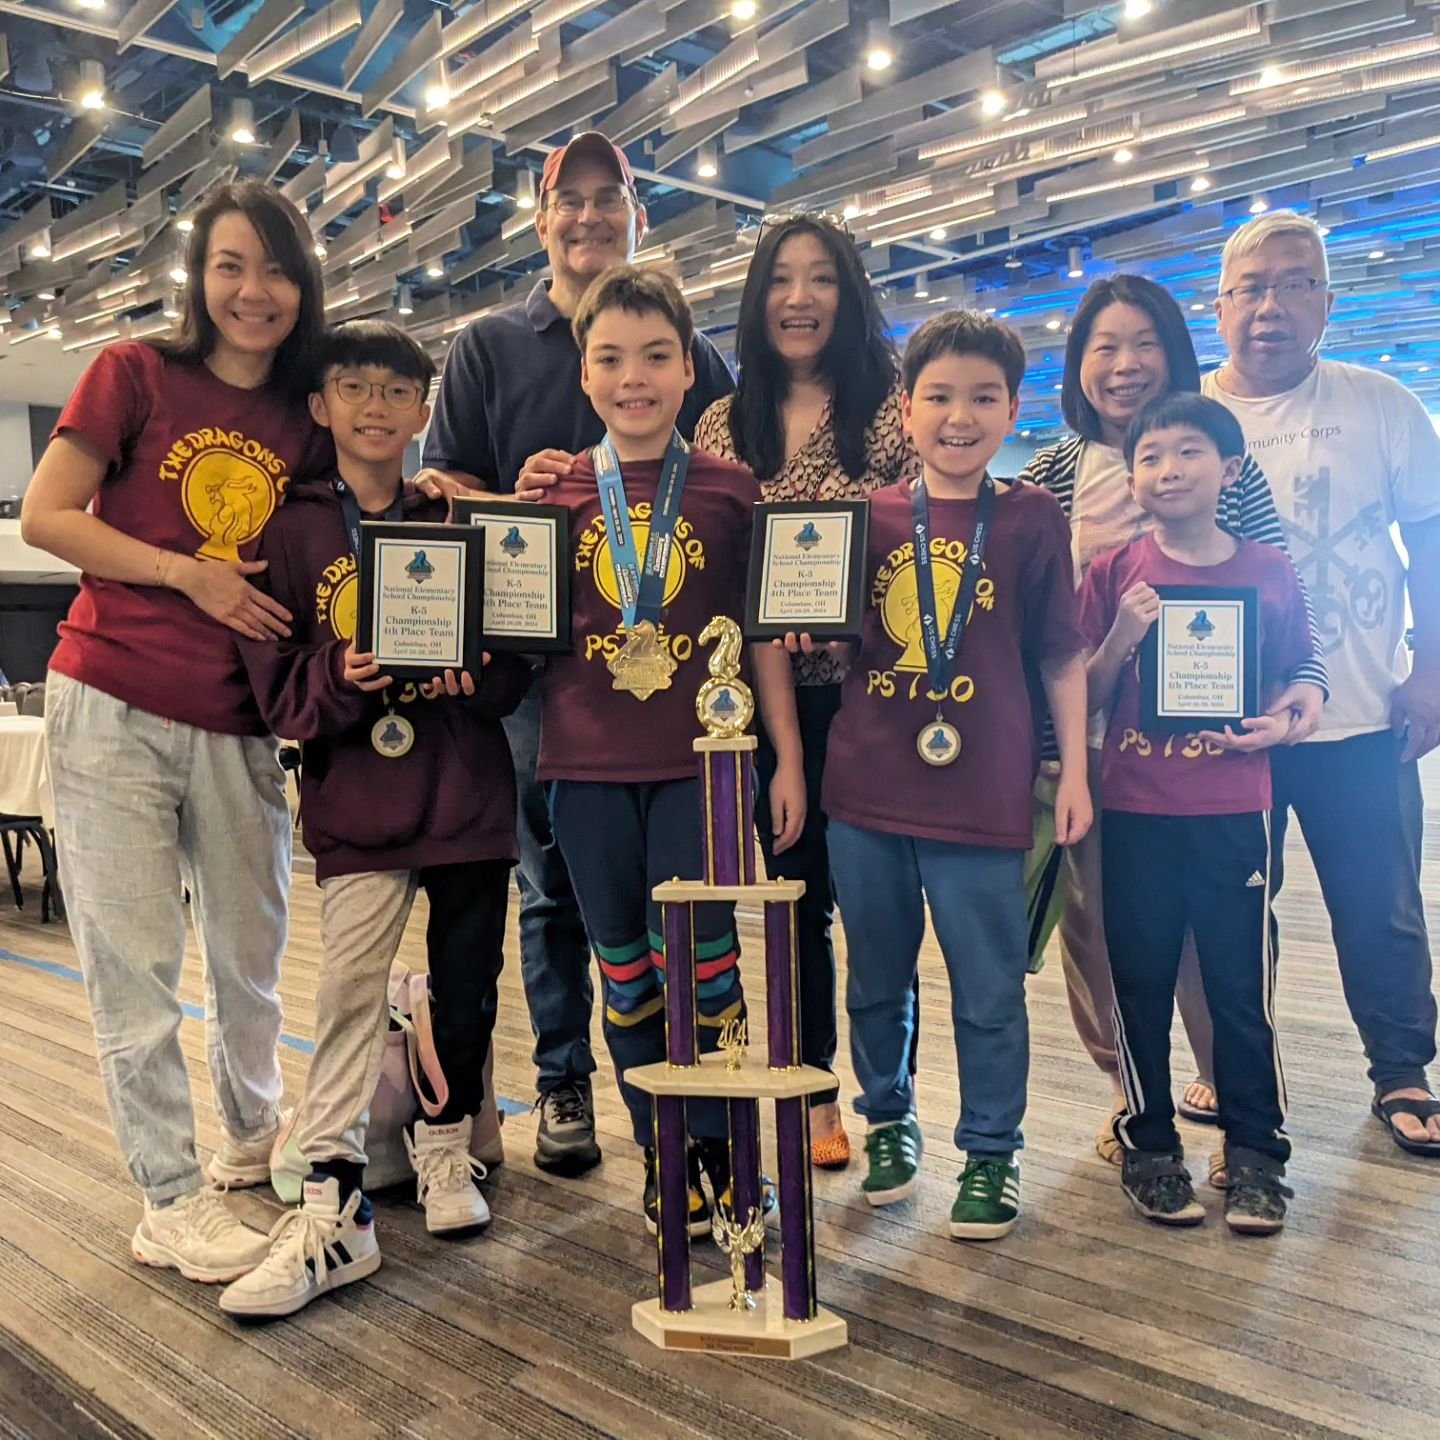 Congratulations Dragons! PS 130M #4 team award 🏆 in the K-5 Championship section. Thank you parents, for your ongoing and neverending support 💜

Our 5th grade graduates are leaving big shoes to fill for future Nationals! #elemchesschamps #ps130mche